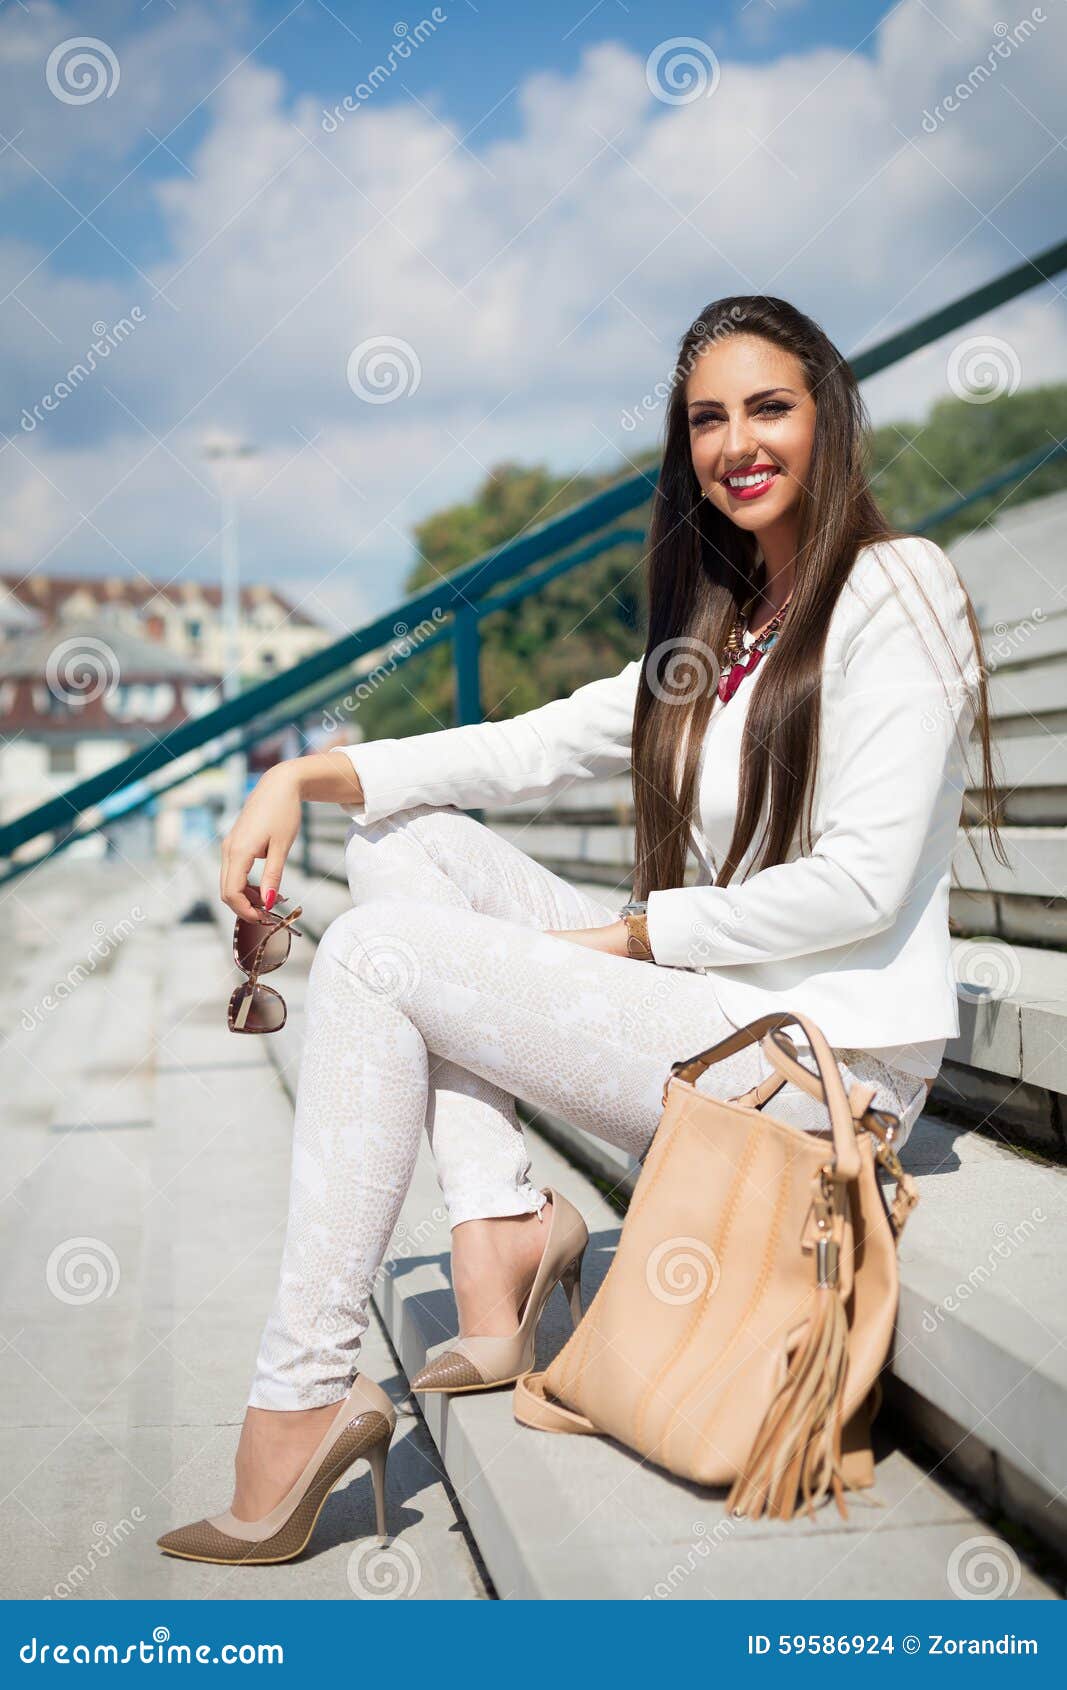 Businesswoman Sitting on Stairs Stock Photo - Image of office, work ...